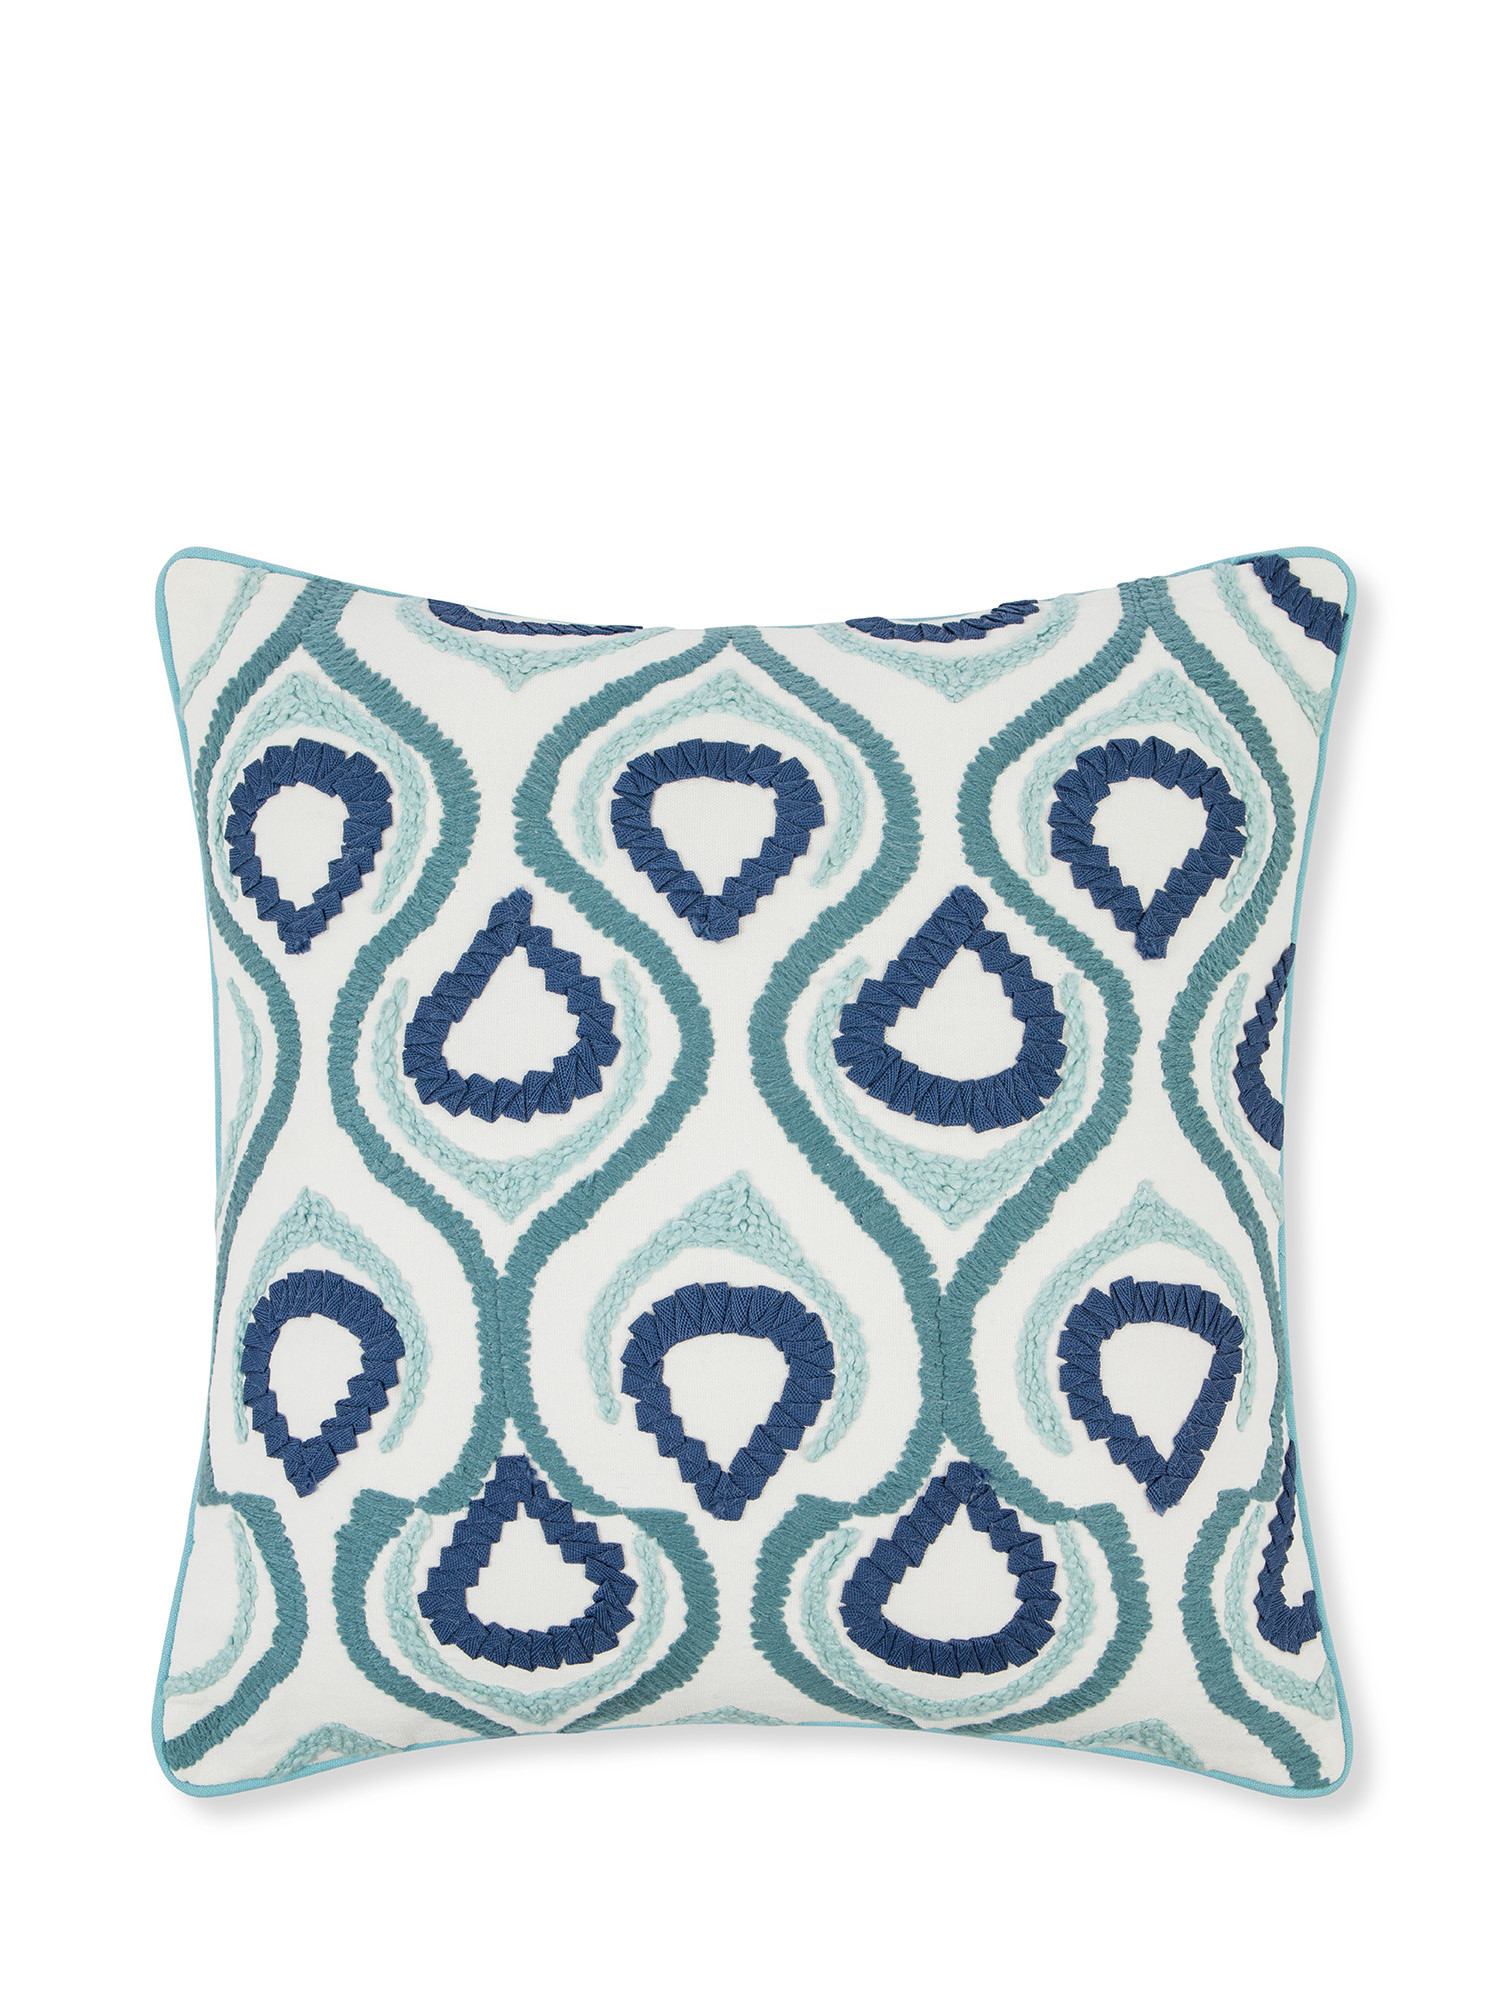 Embroidered cushion with geometric pattern 45x45cm, Blue, large image number 0